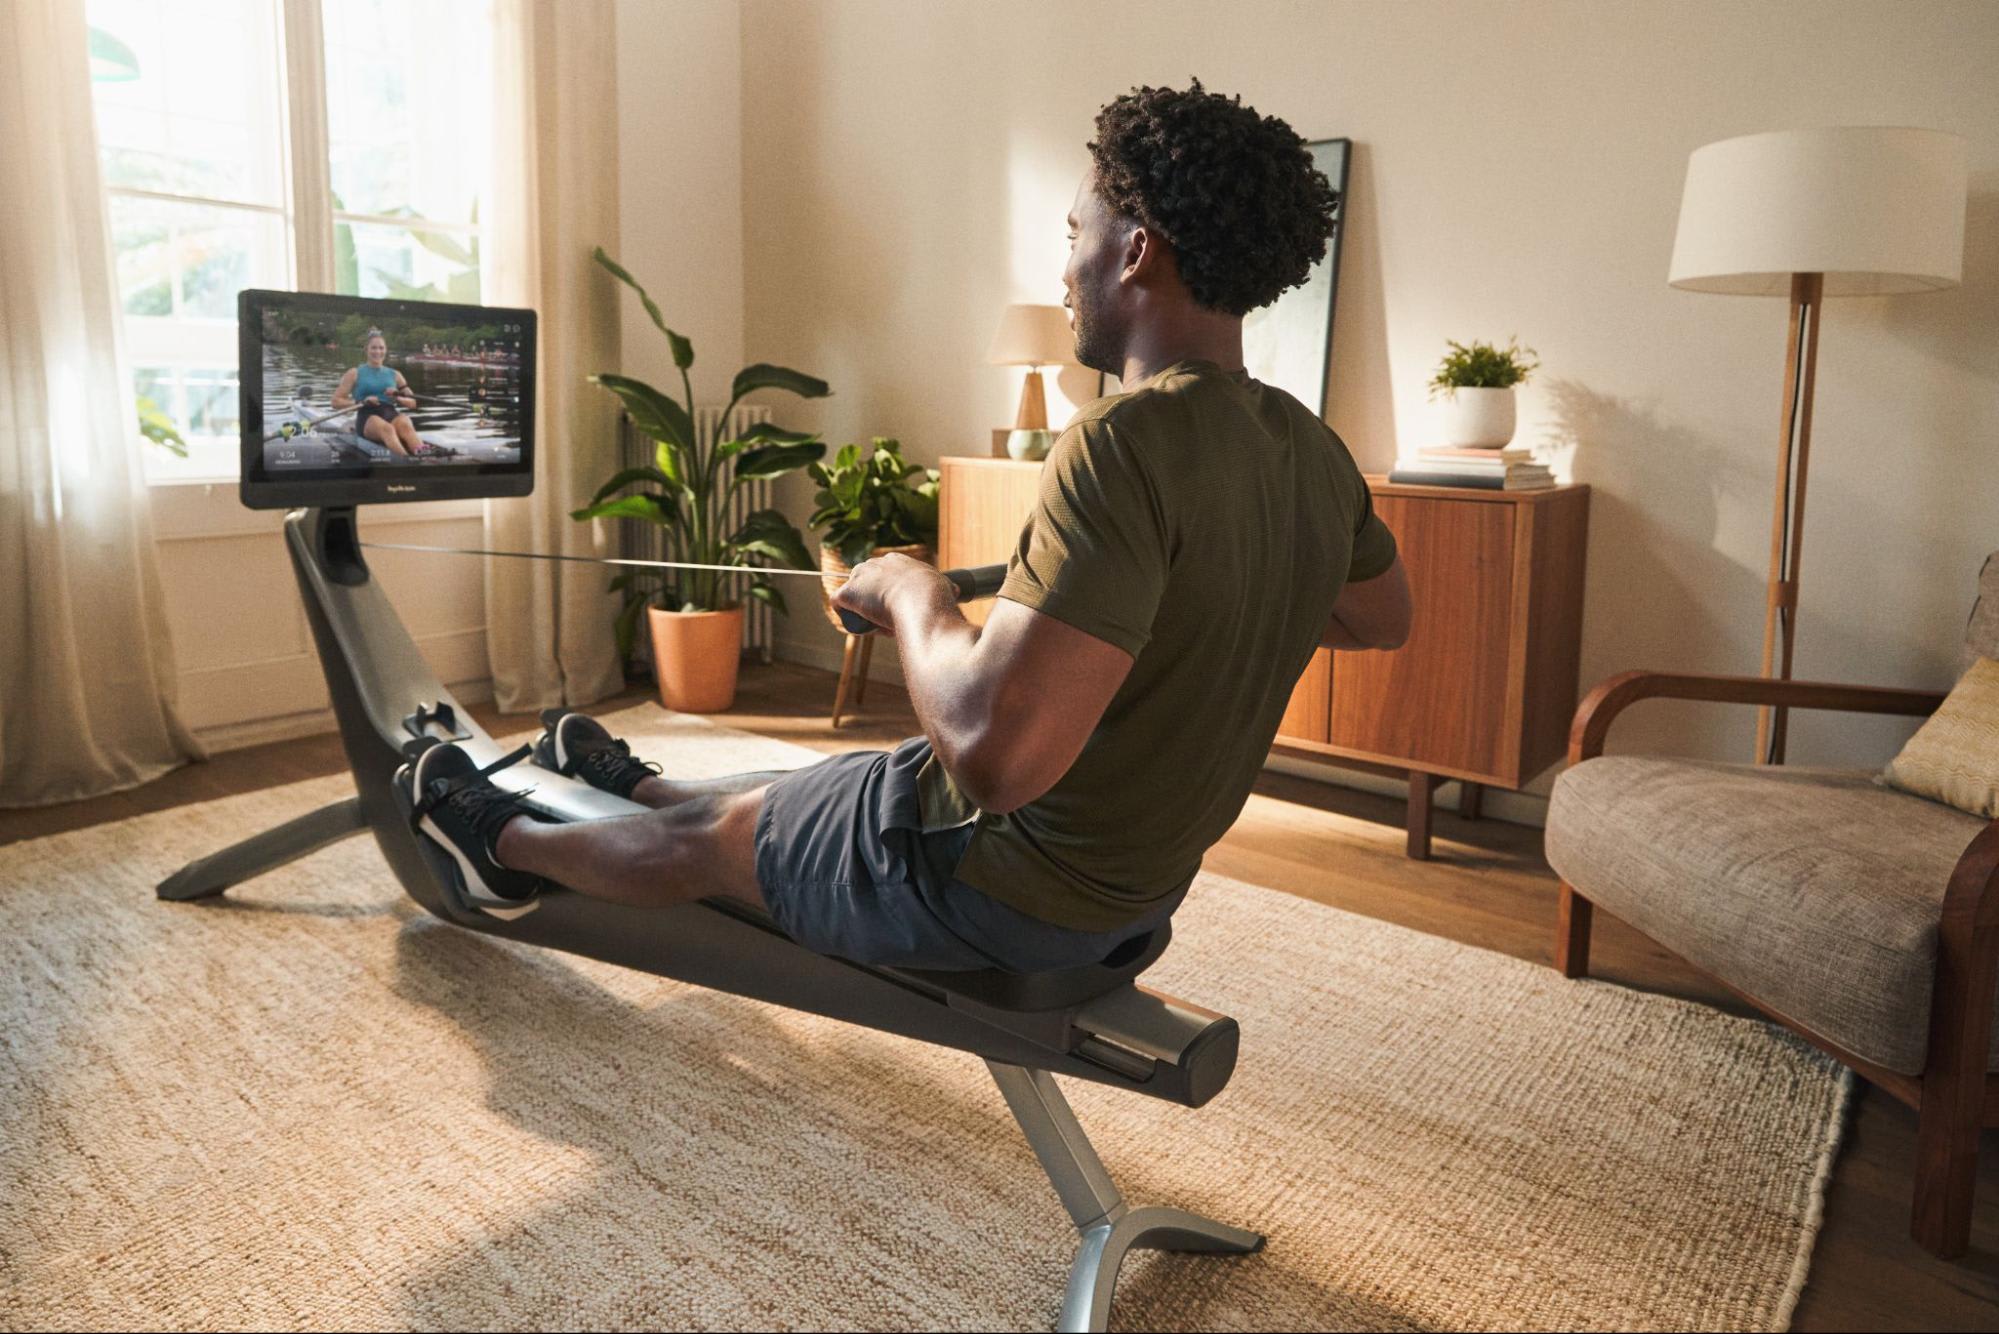 The best workout equipment to use at home.